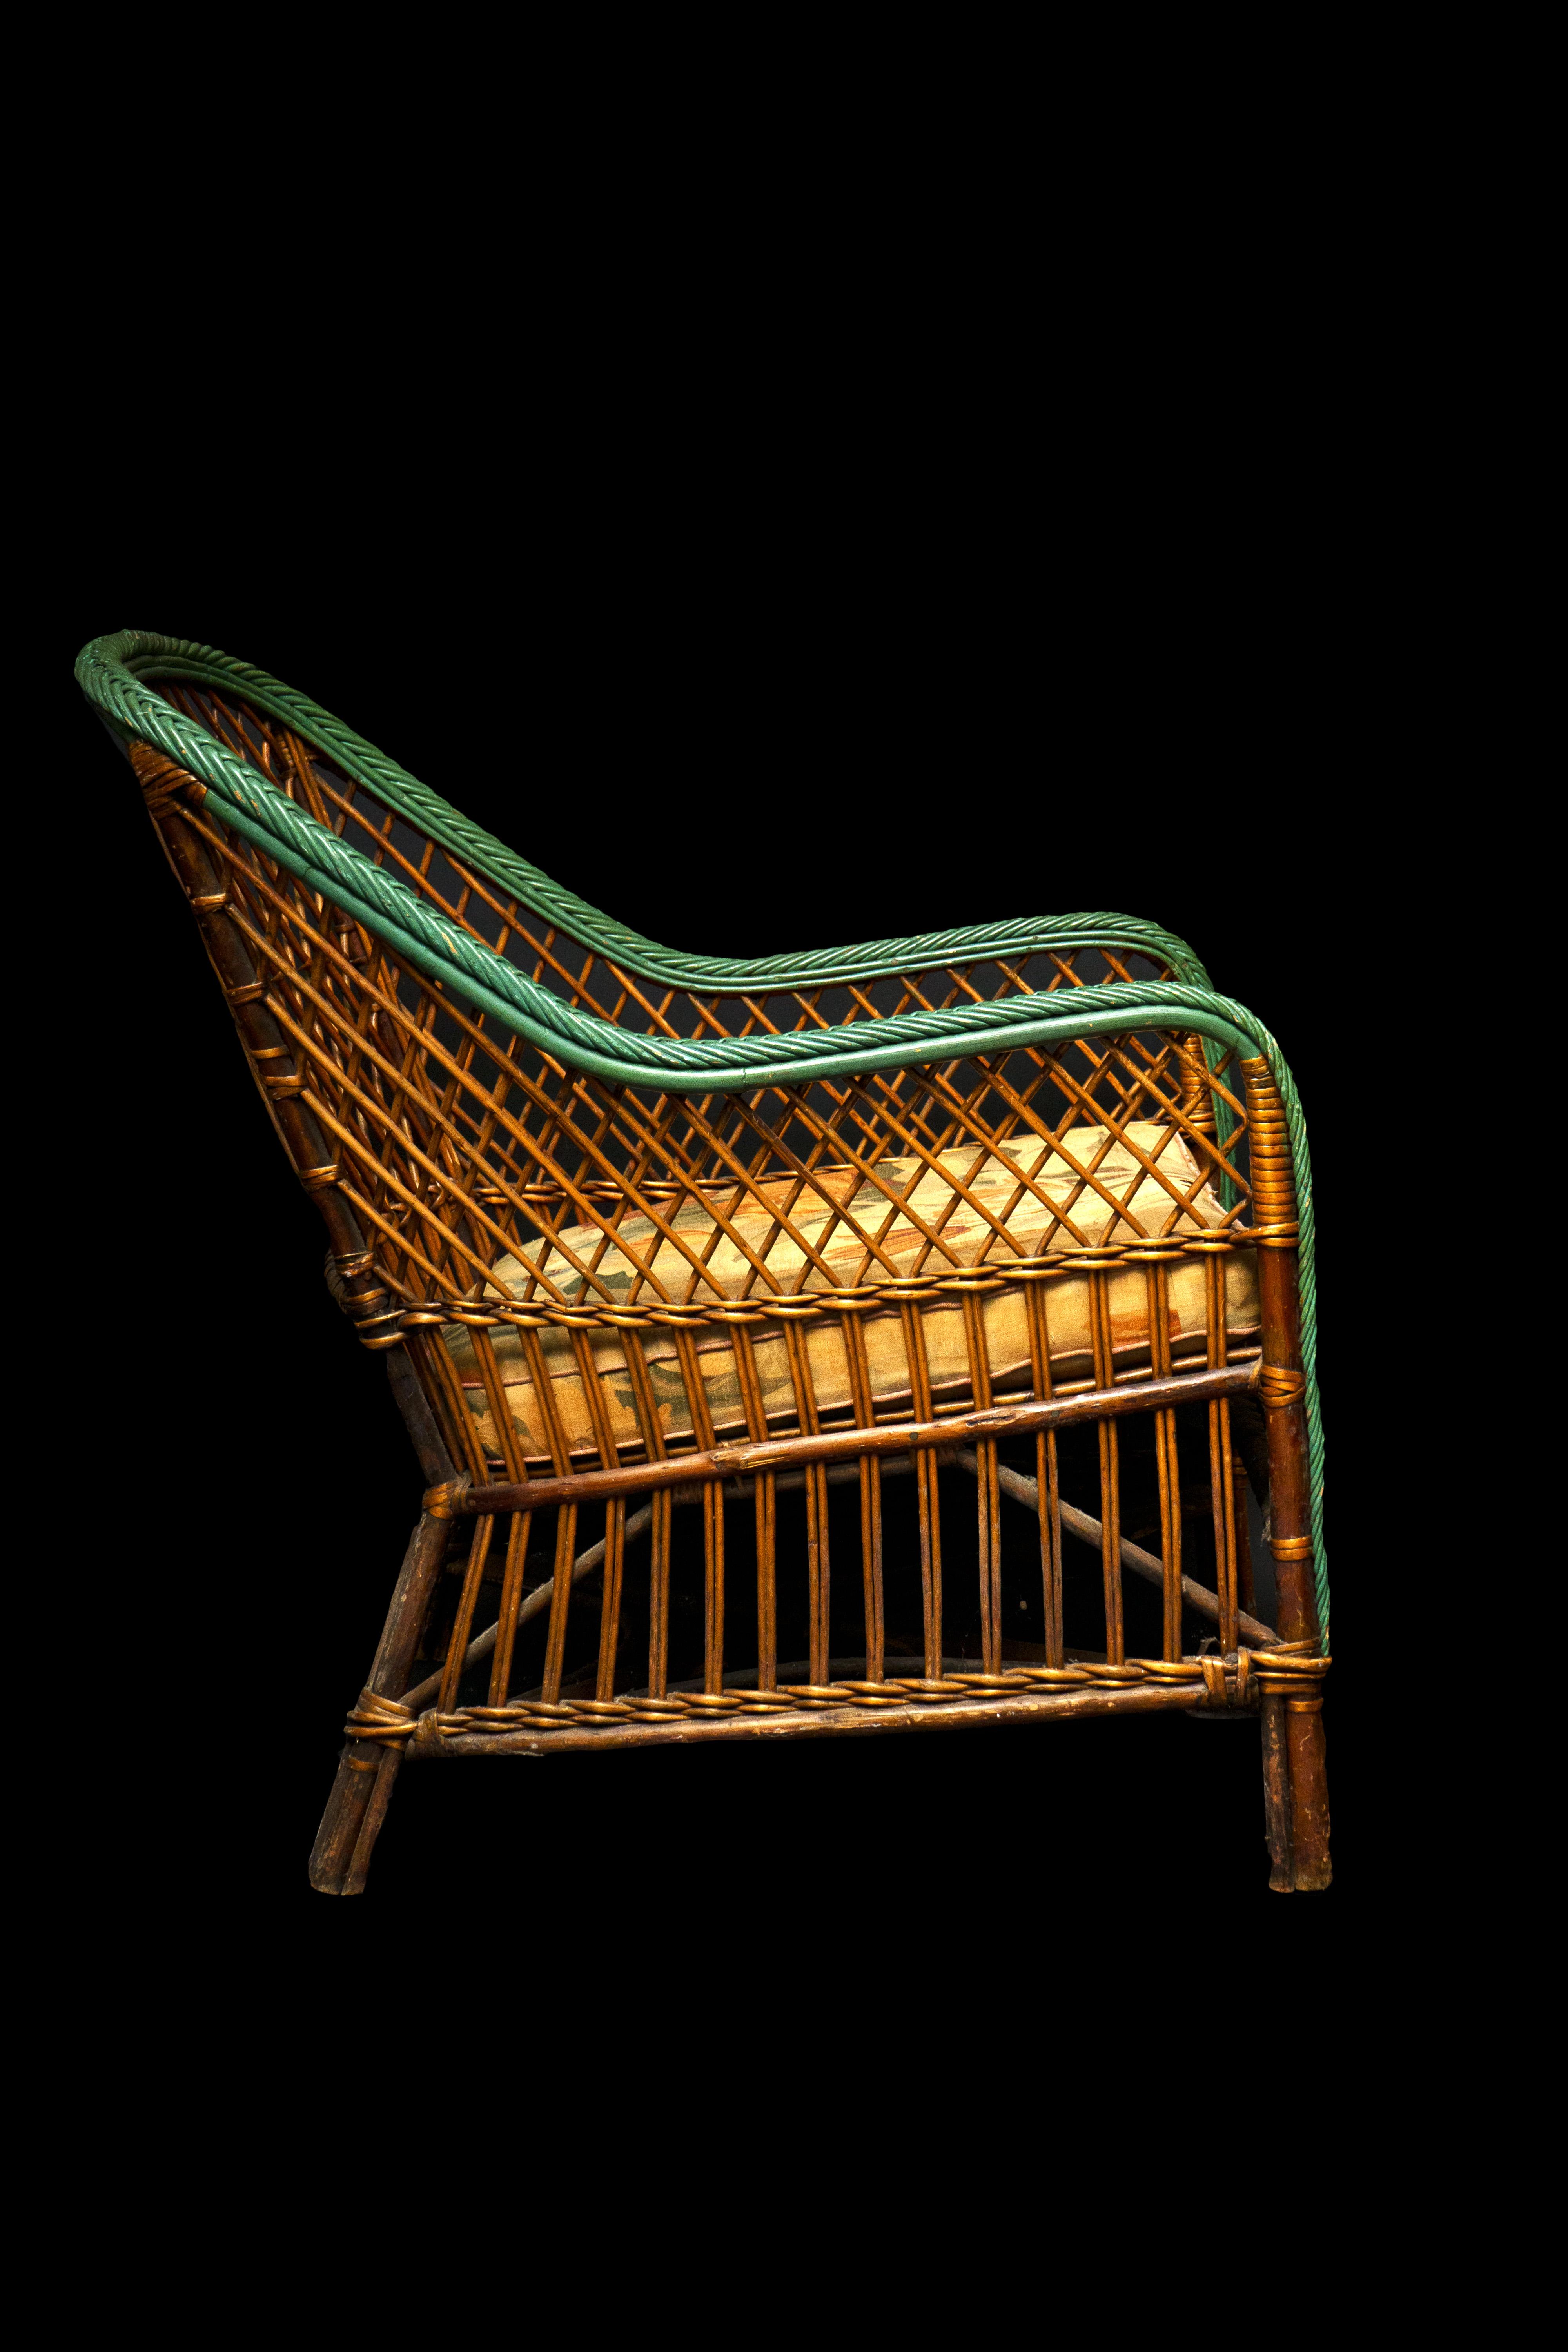 20th Century Vintage Wicker Chair W/ Cushion and a Green Painted Edge